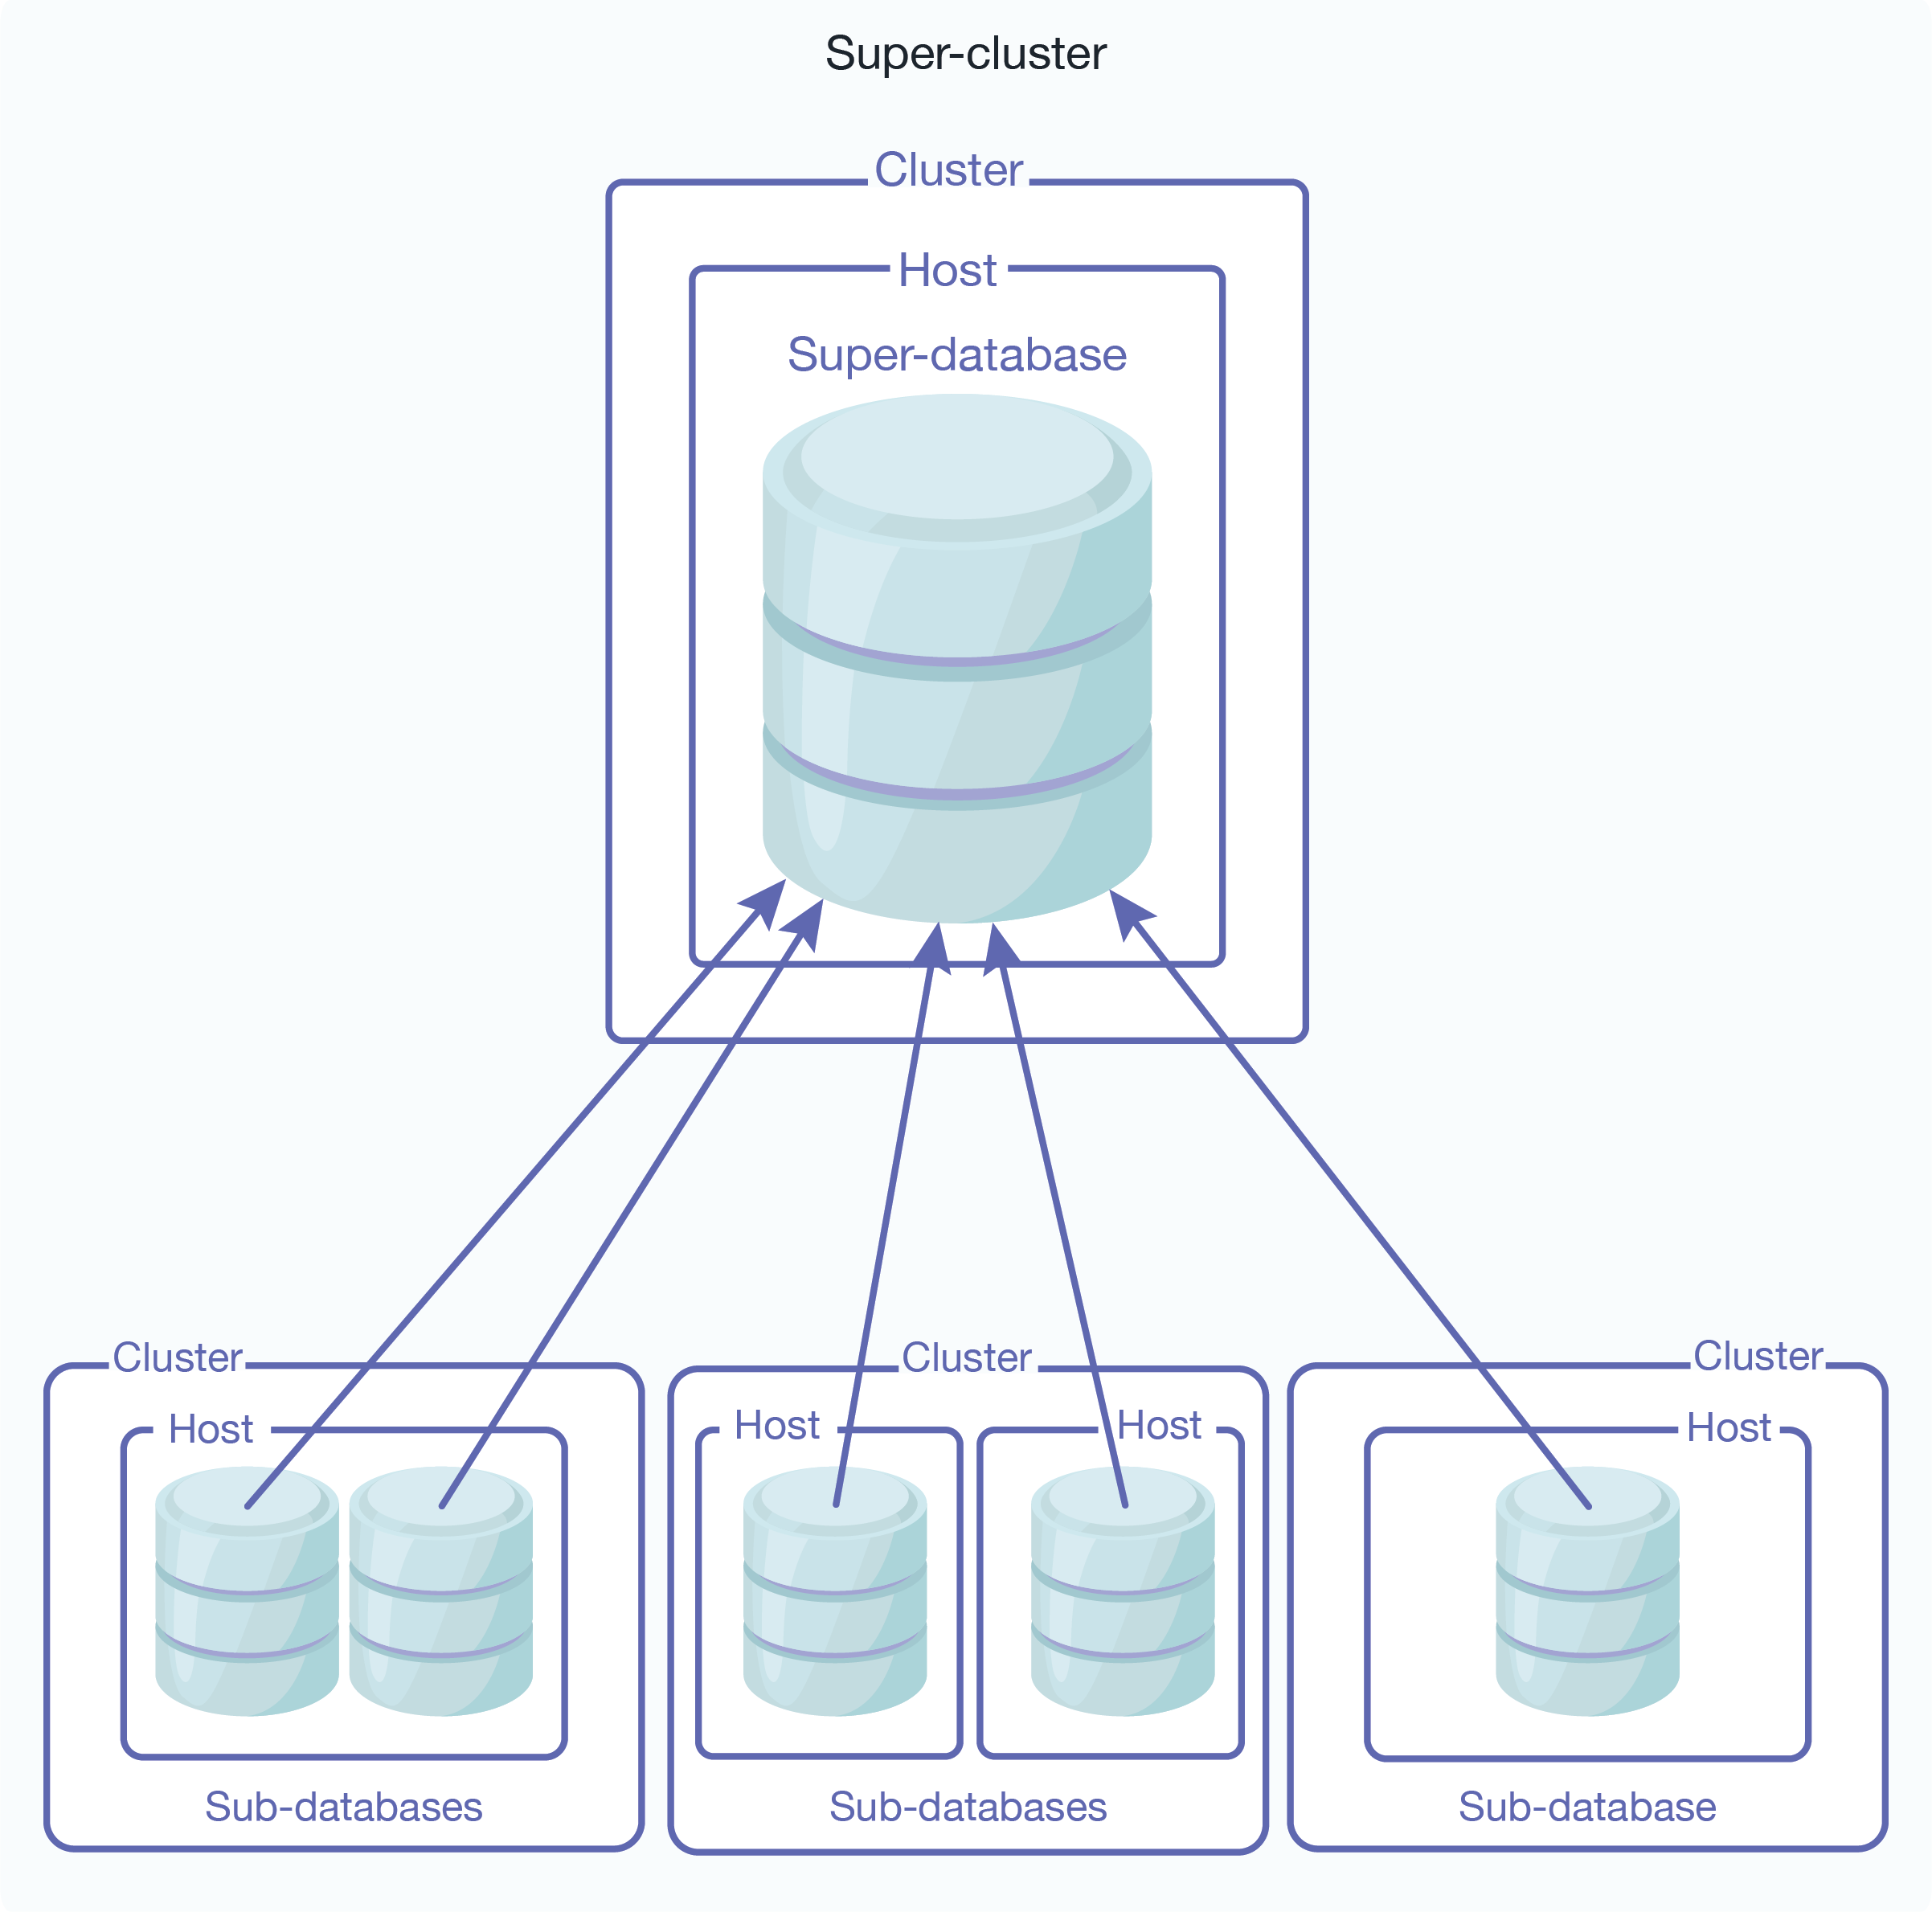 Illustration of is a super-database configured with sub-databases on different clusters. The cluster hosting the super-database must be coupled with the foreign clusters hosting the sub-databases.